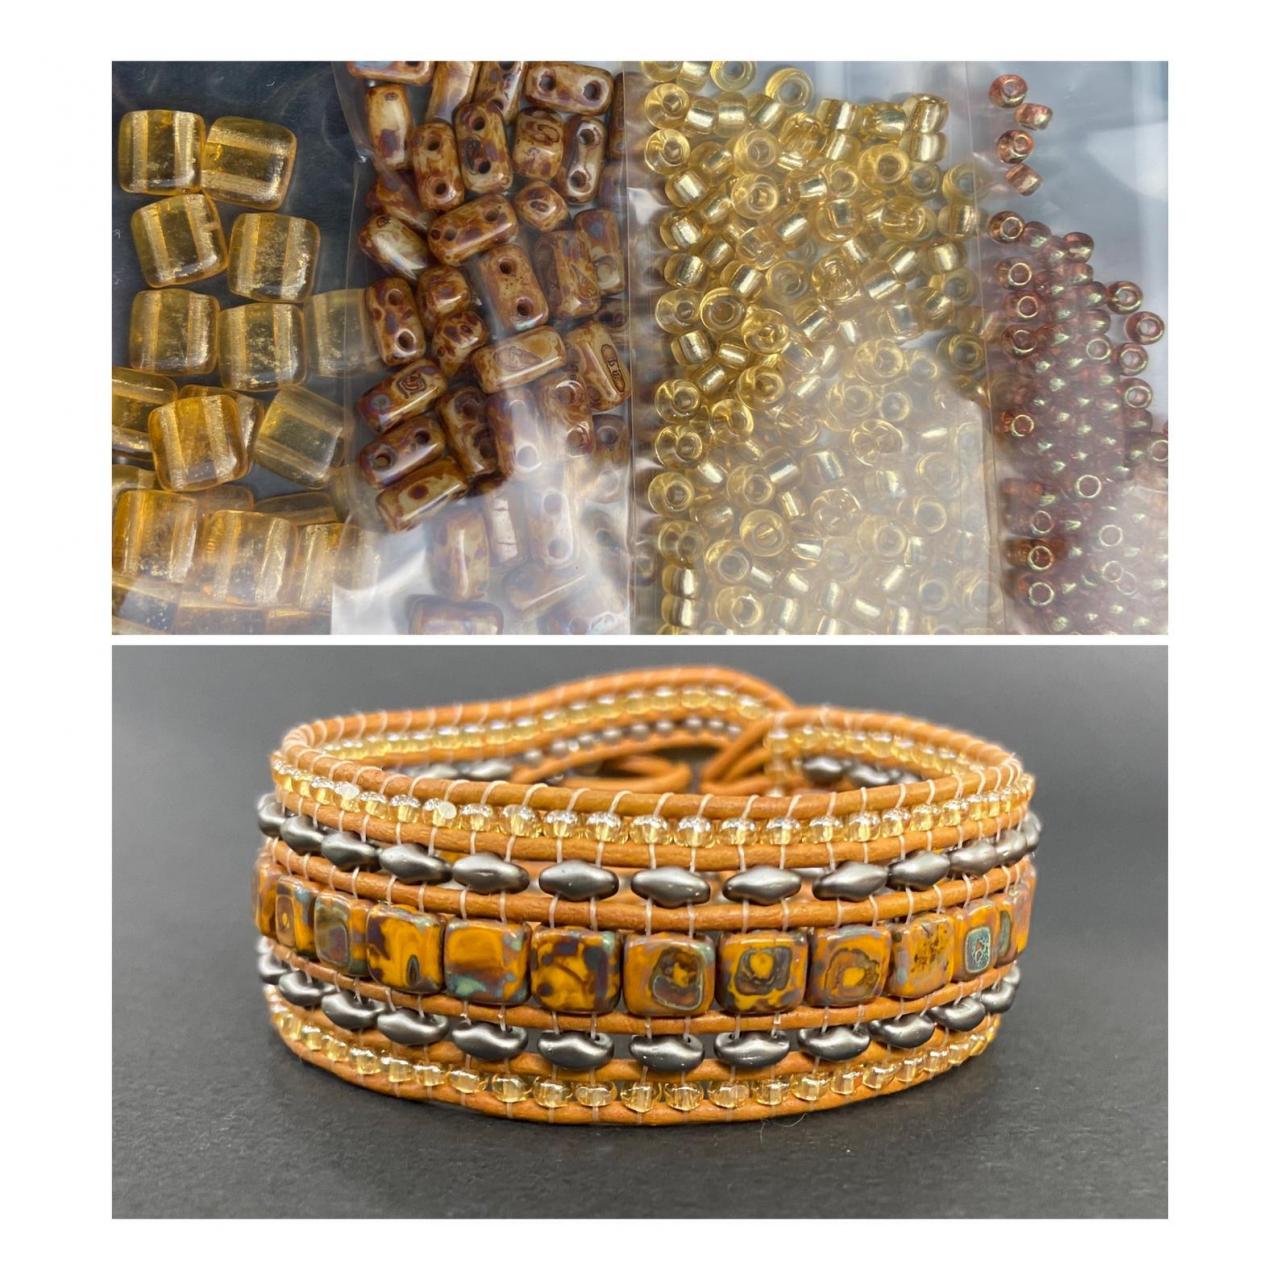 Kit Picasso Brown Topaz Wide Leather Beaded Cuff Kit By Leila Martin Bohemian Diy Intermediate Instructions Complete No Tools